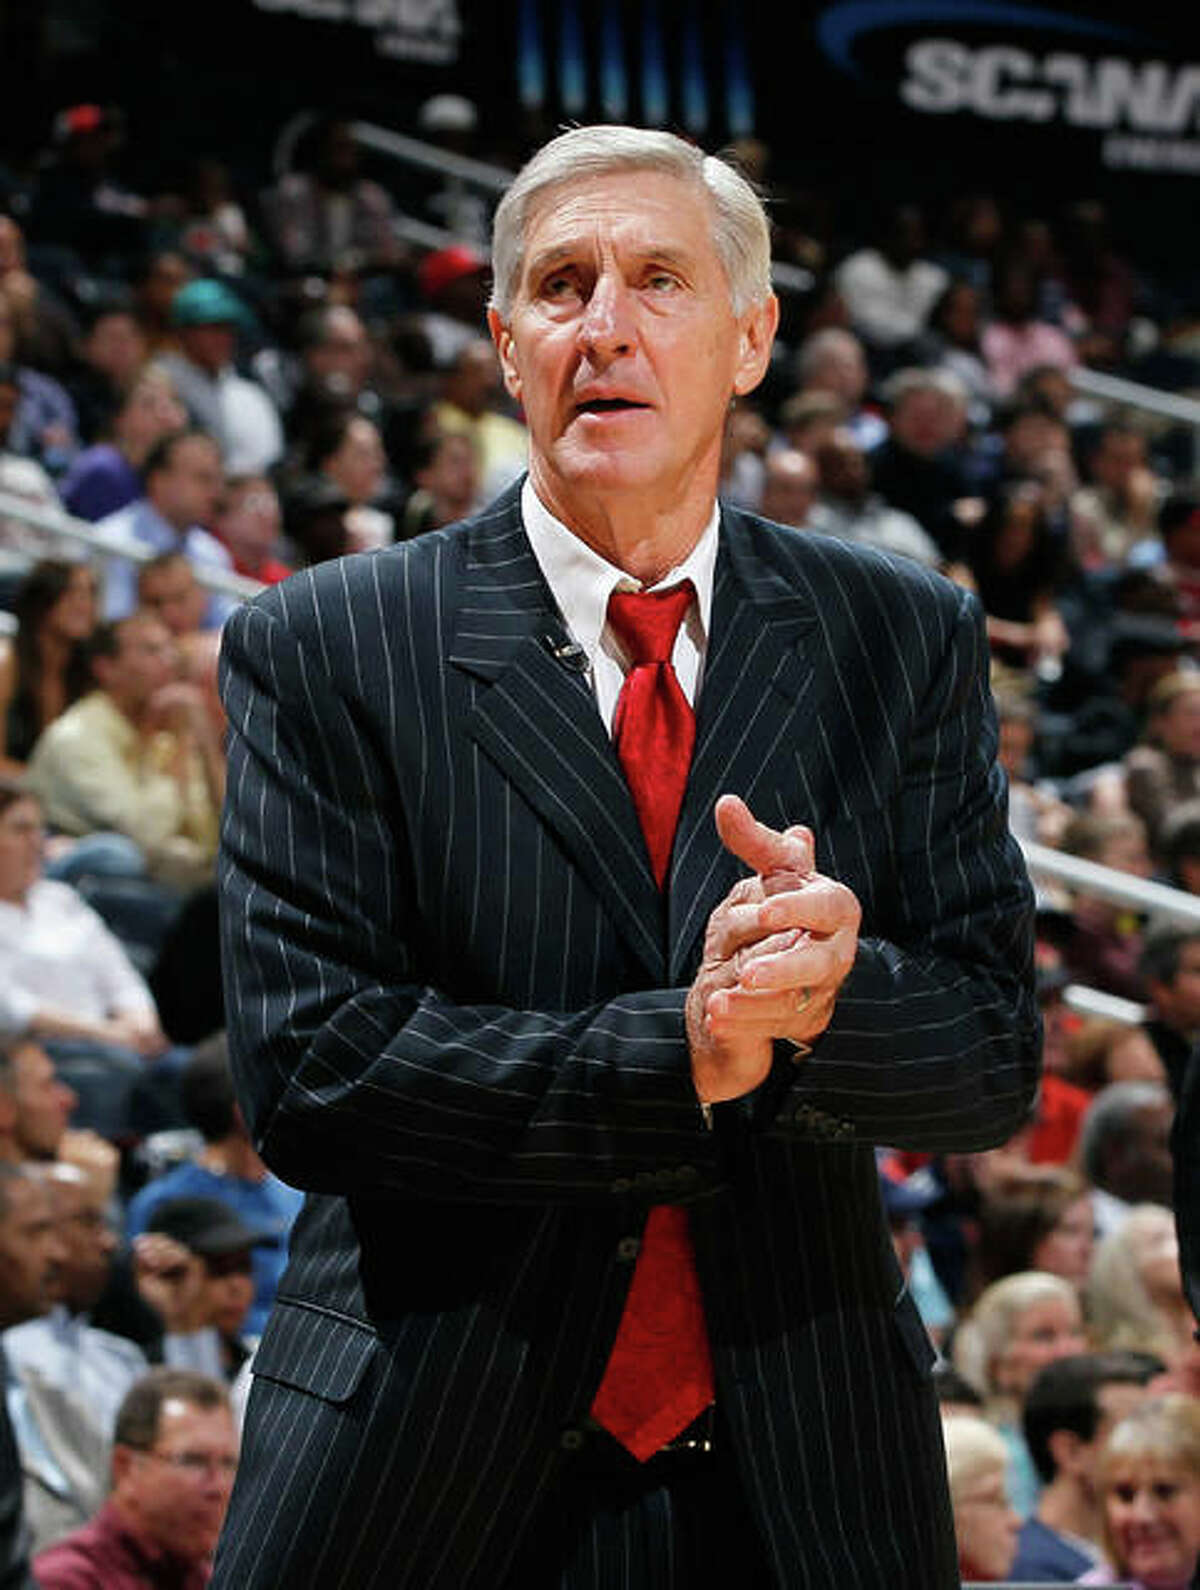 Jerry Sloan, Utah Jazz great and Hall of Fame coach, dies at 78